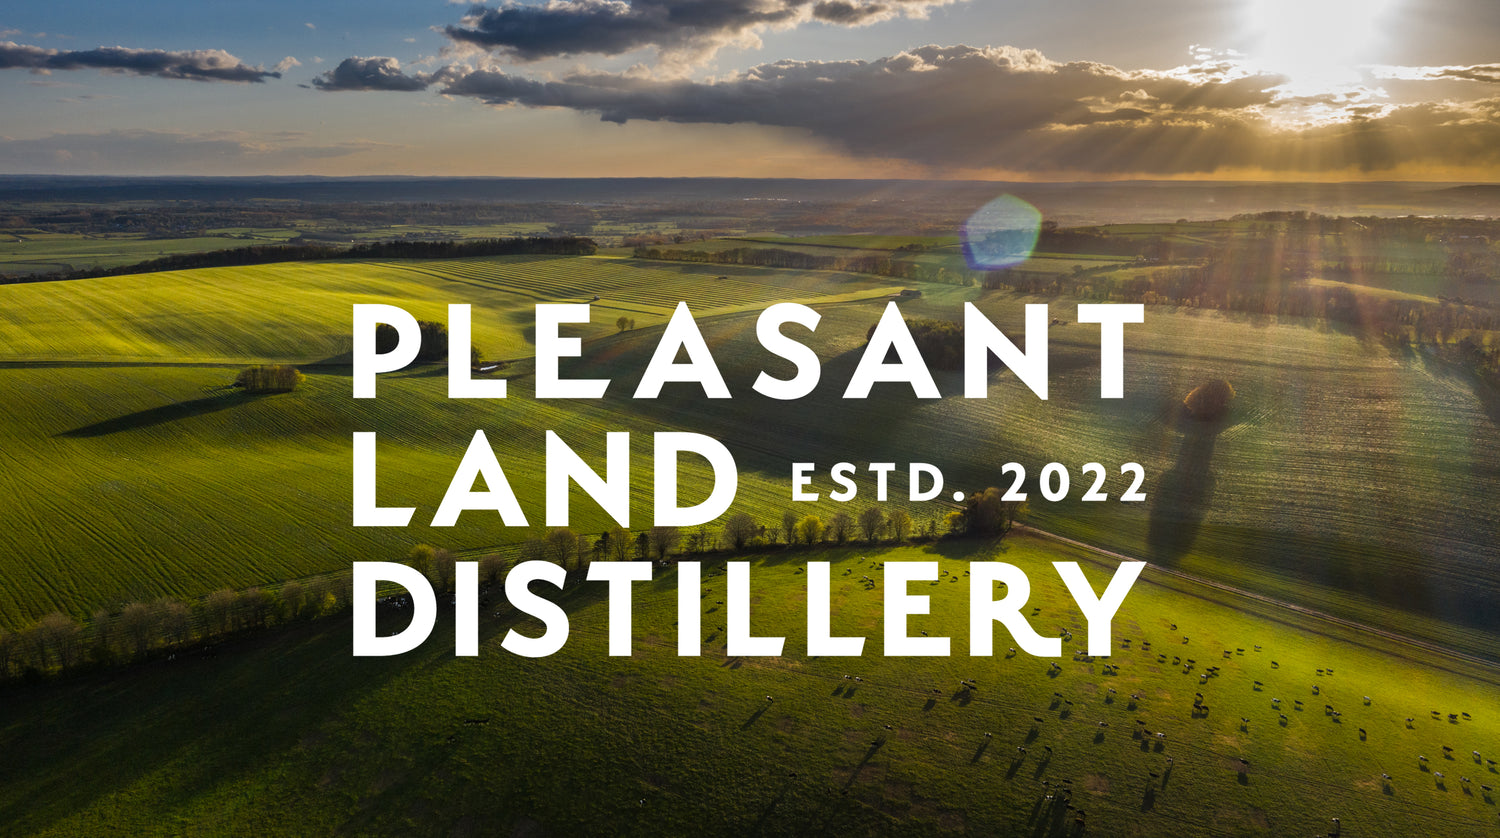 Contract distillery contract distilling services sustainable distillery